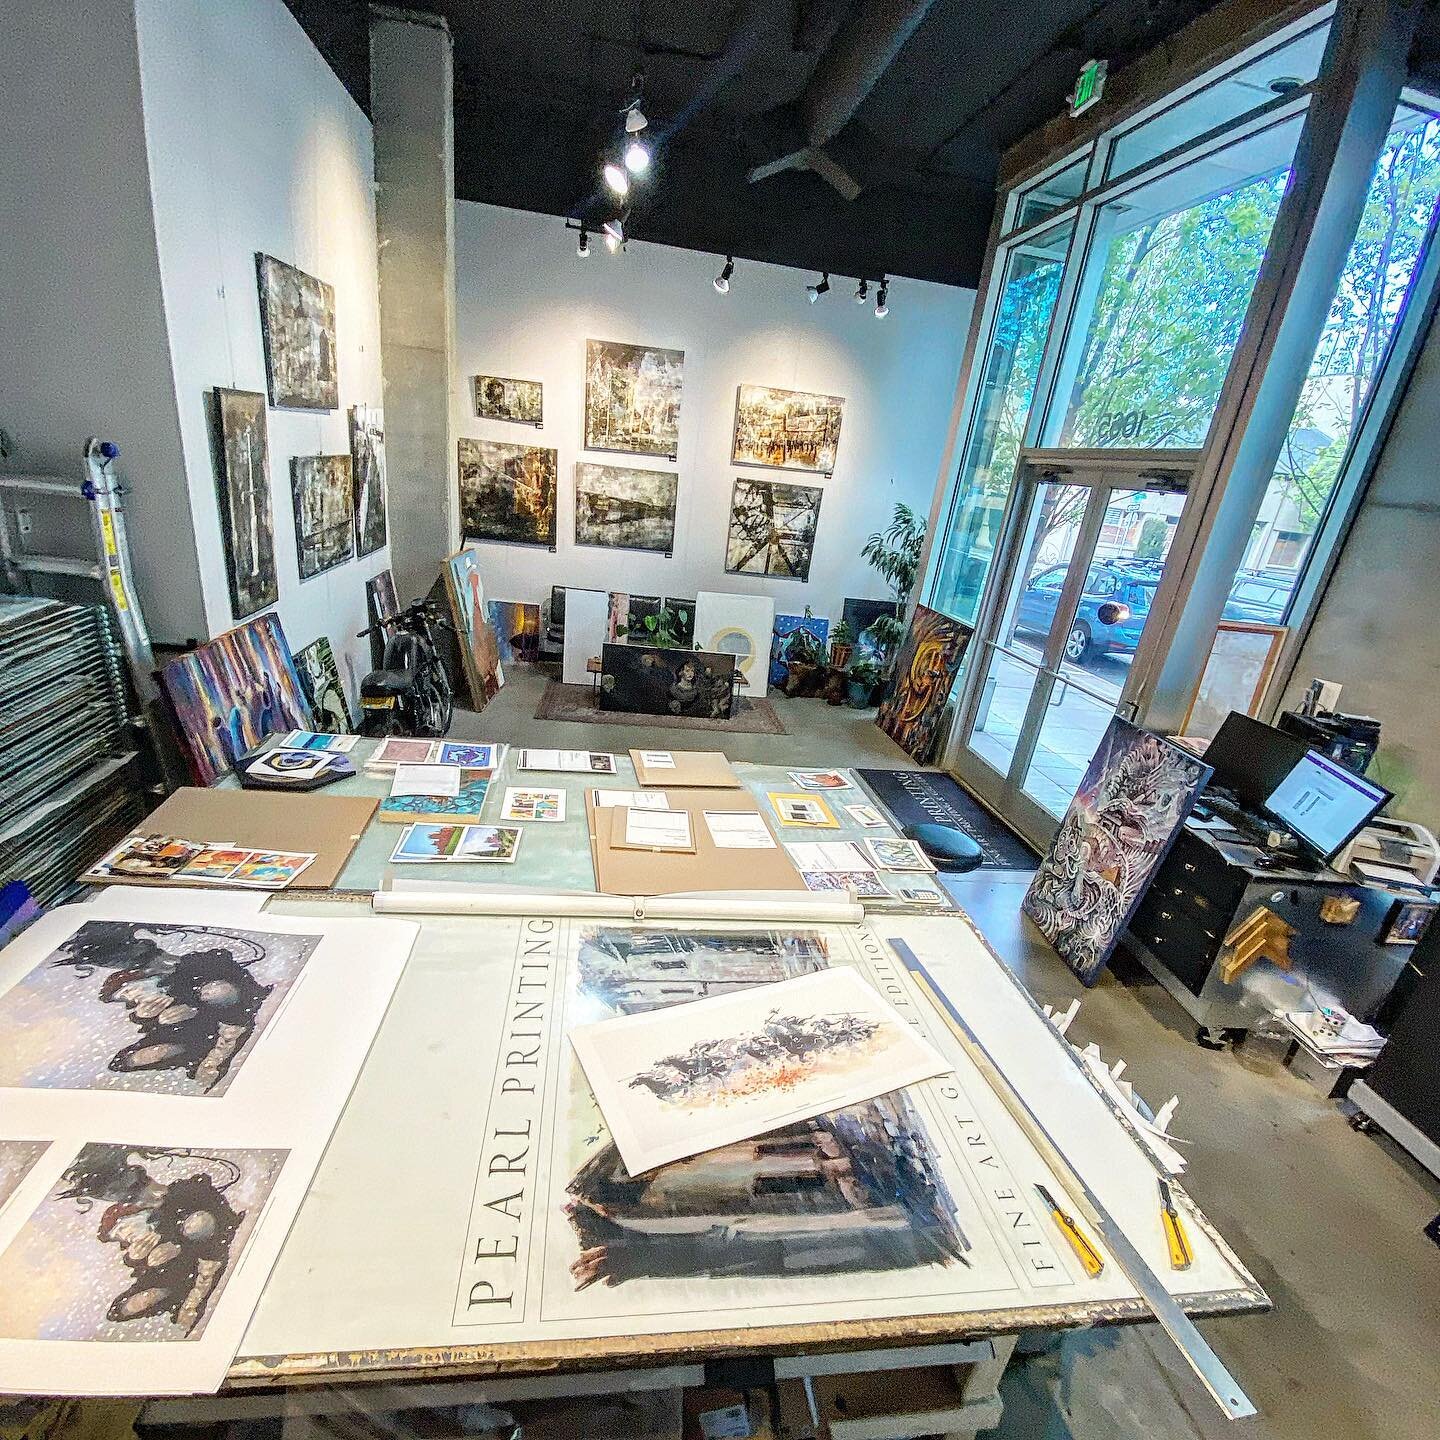 Love having nice weather back.. the large windows here let in so much natural light. Nice having so much artwork in the shop and being surrounded by so much talent. #sunshine #sun #light #sunlight #gallery #fineart #art #printing #prints #pdxart #pdx